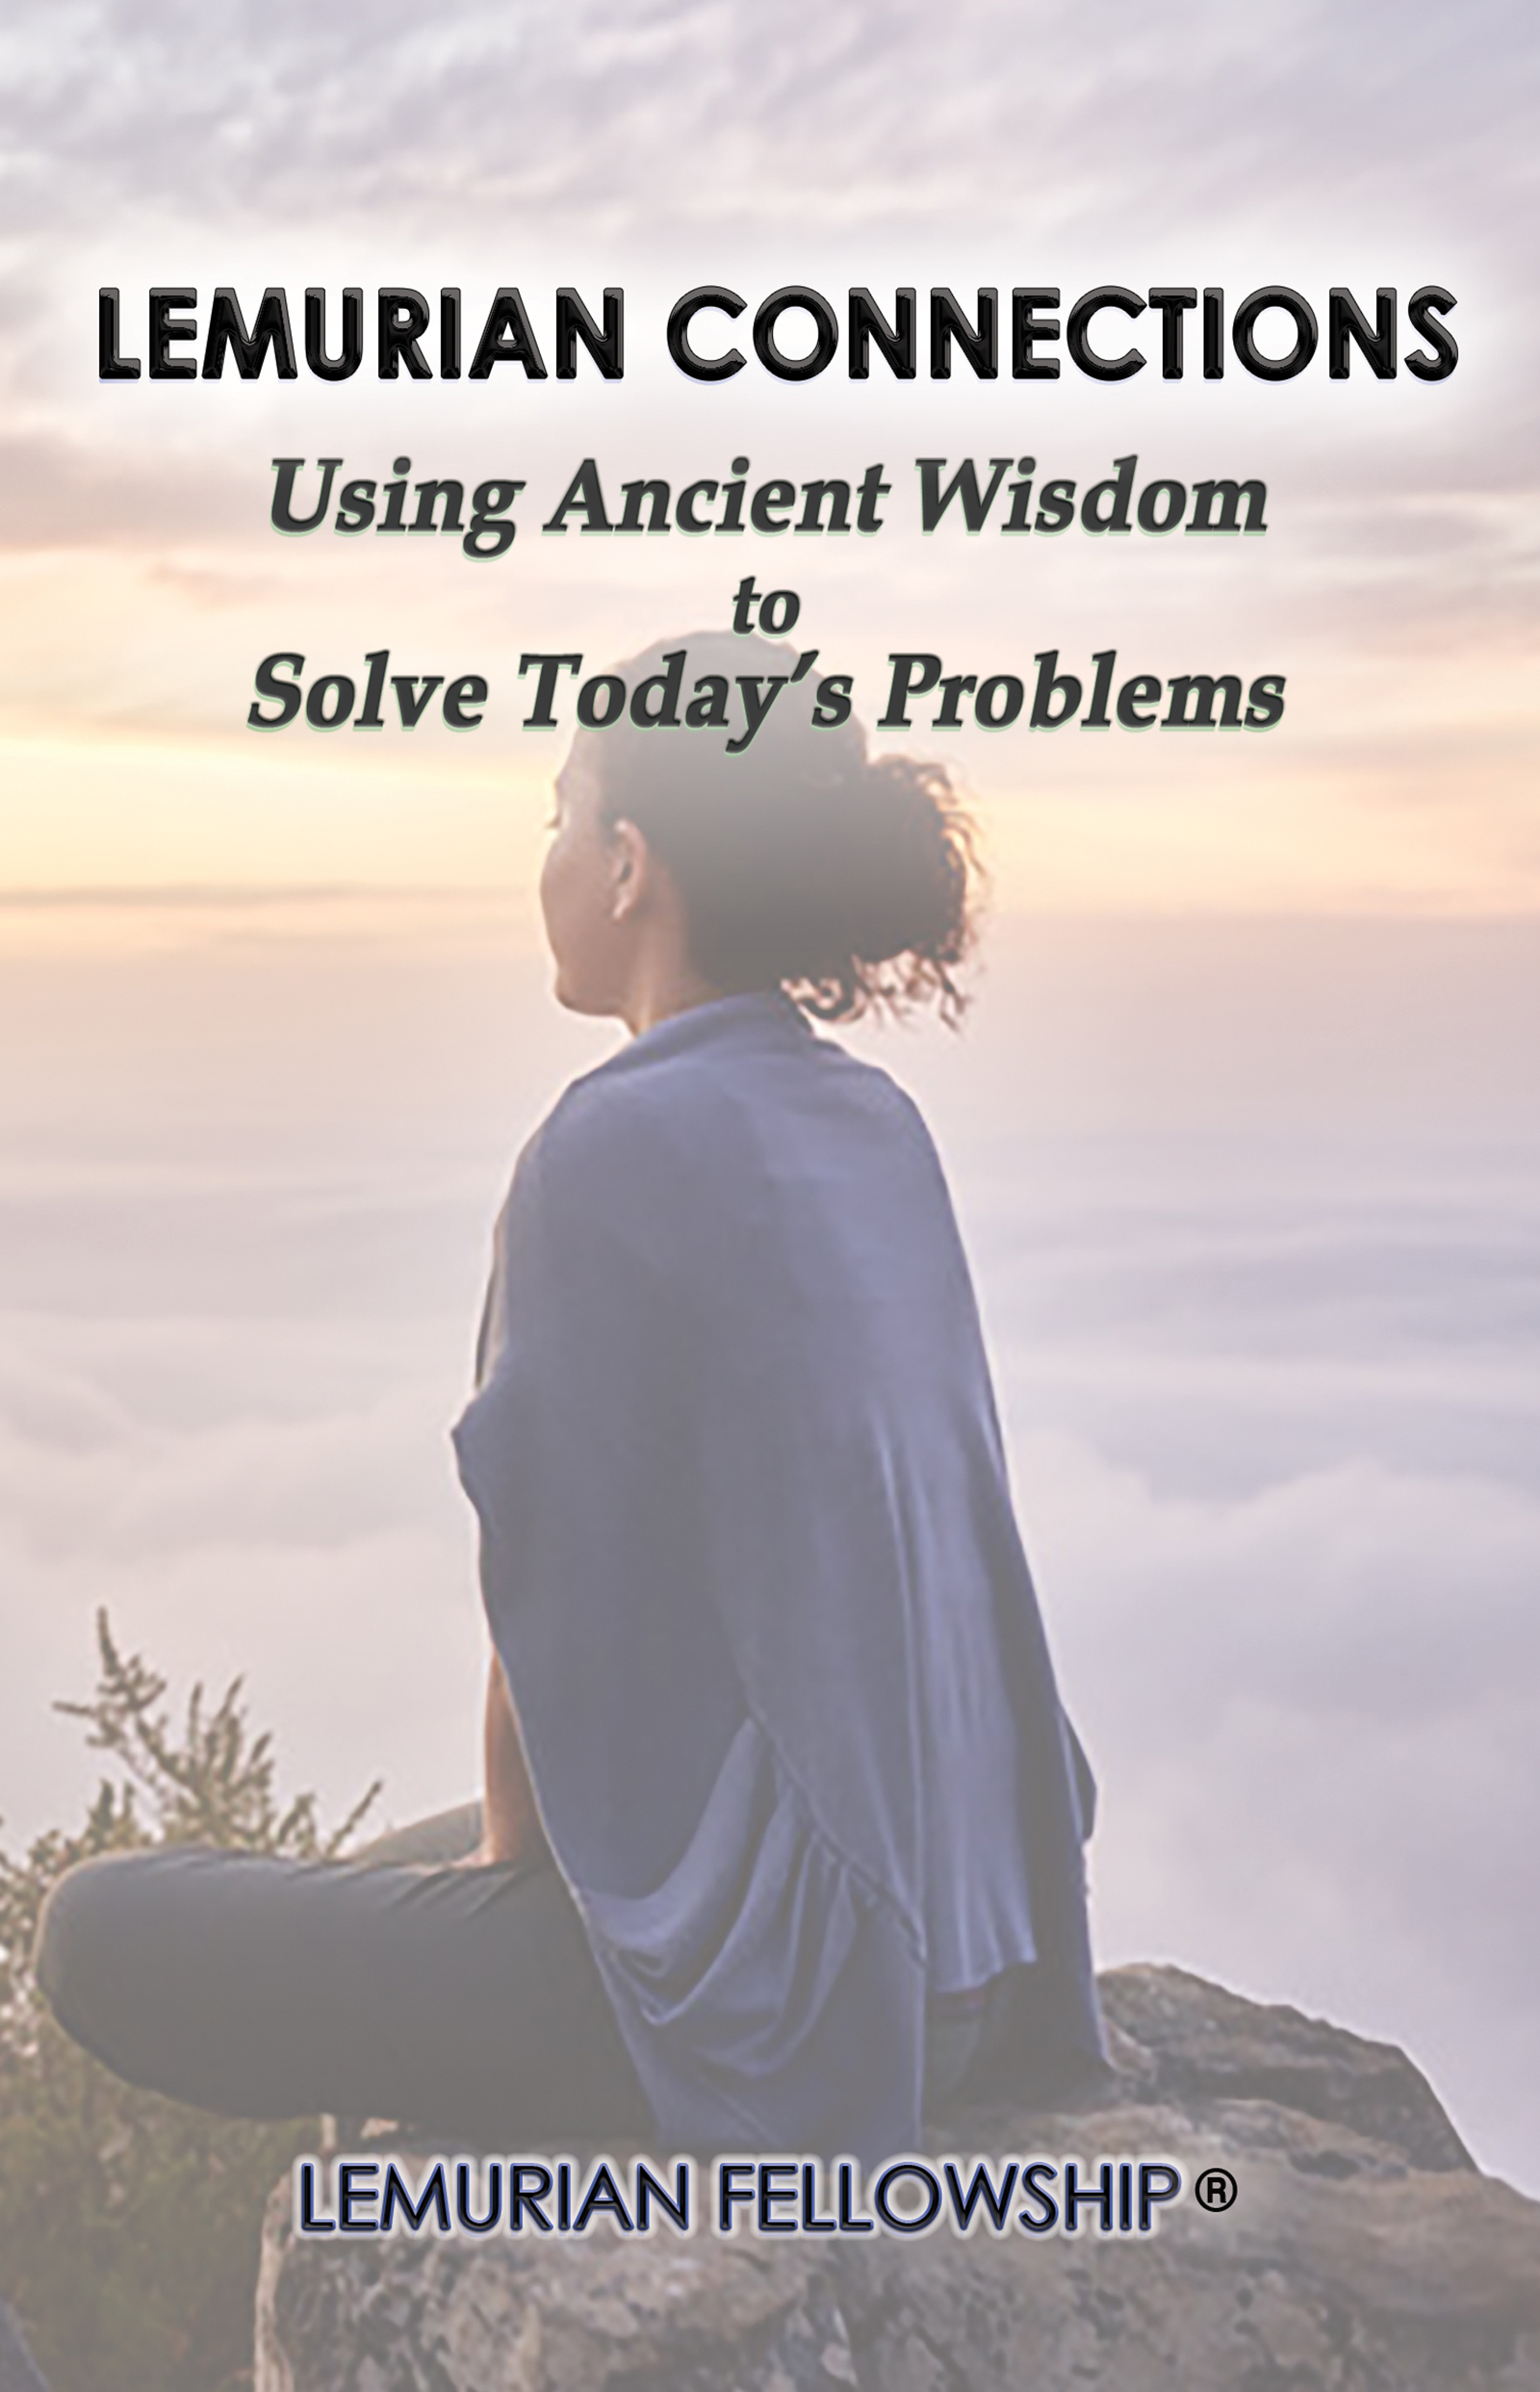 Lemurian Connections: Using Ancient Wisdom to Solve Today’s Problems